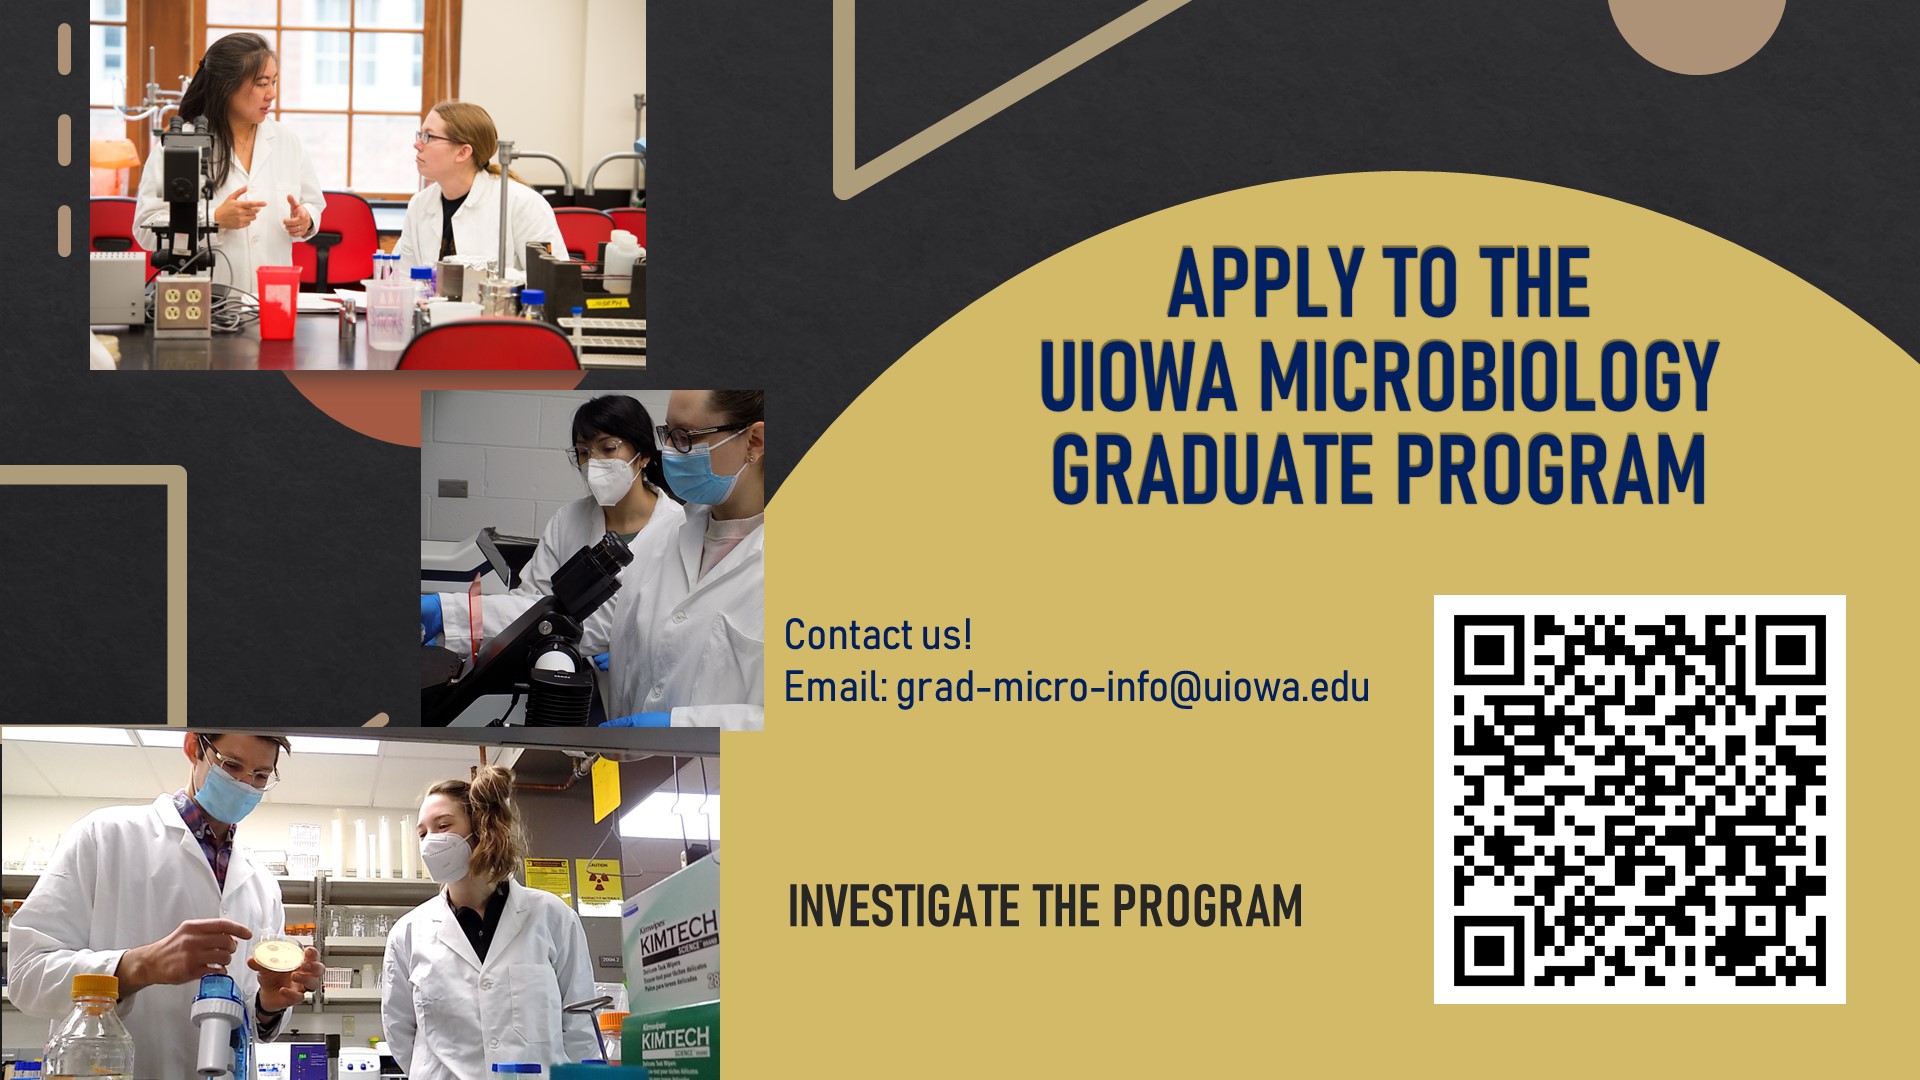 Explore the Micro Graduate Program with images of students and faculty